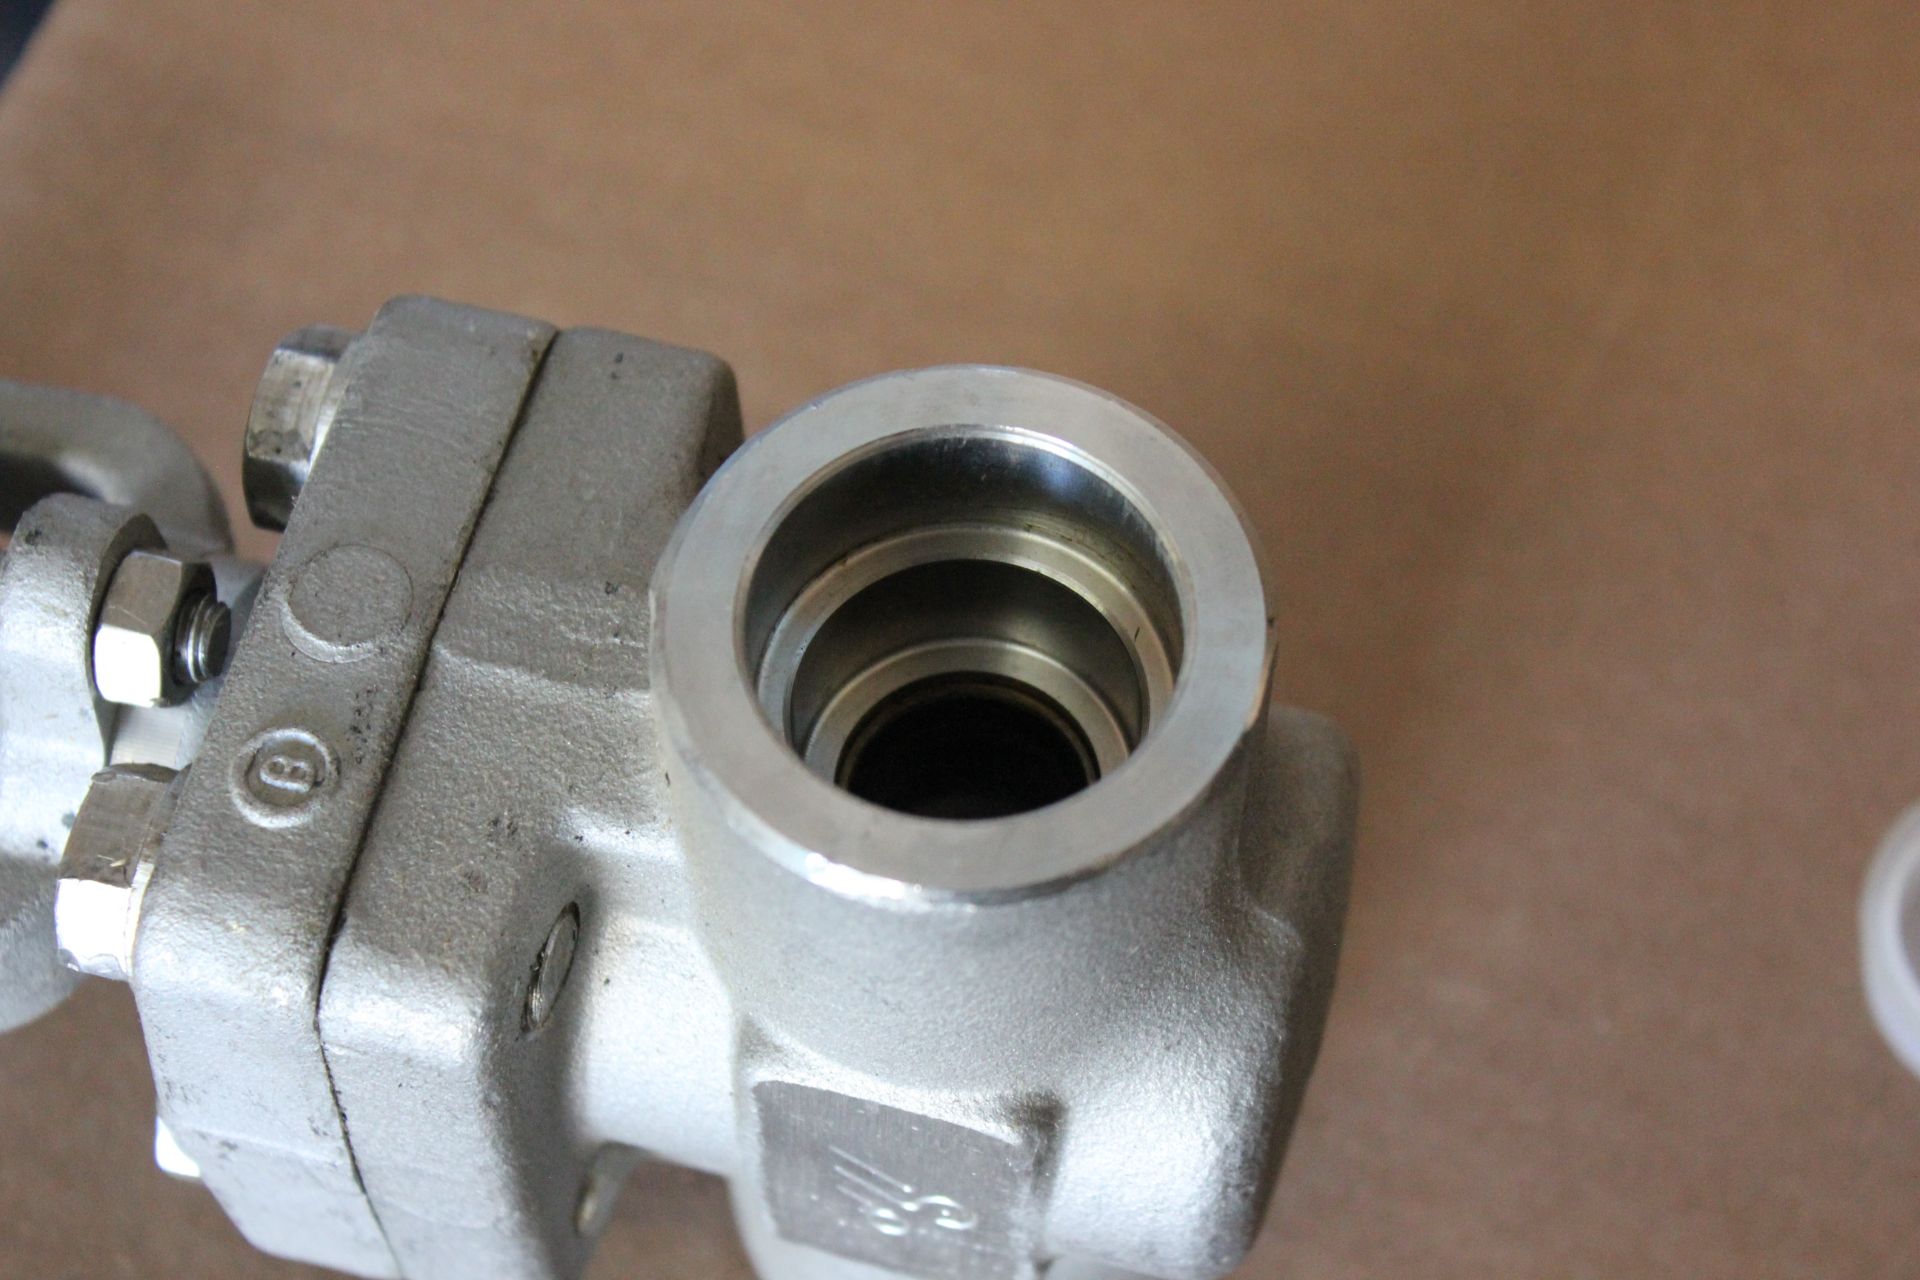 NEW DSI STAINLESS STEEL 1" GATE VALVE - Image 8 of 8